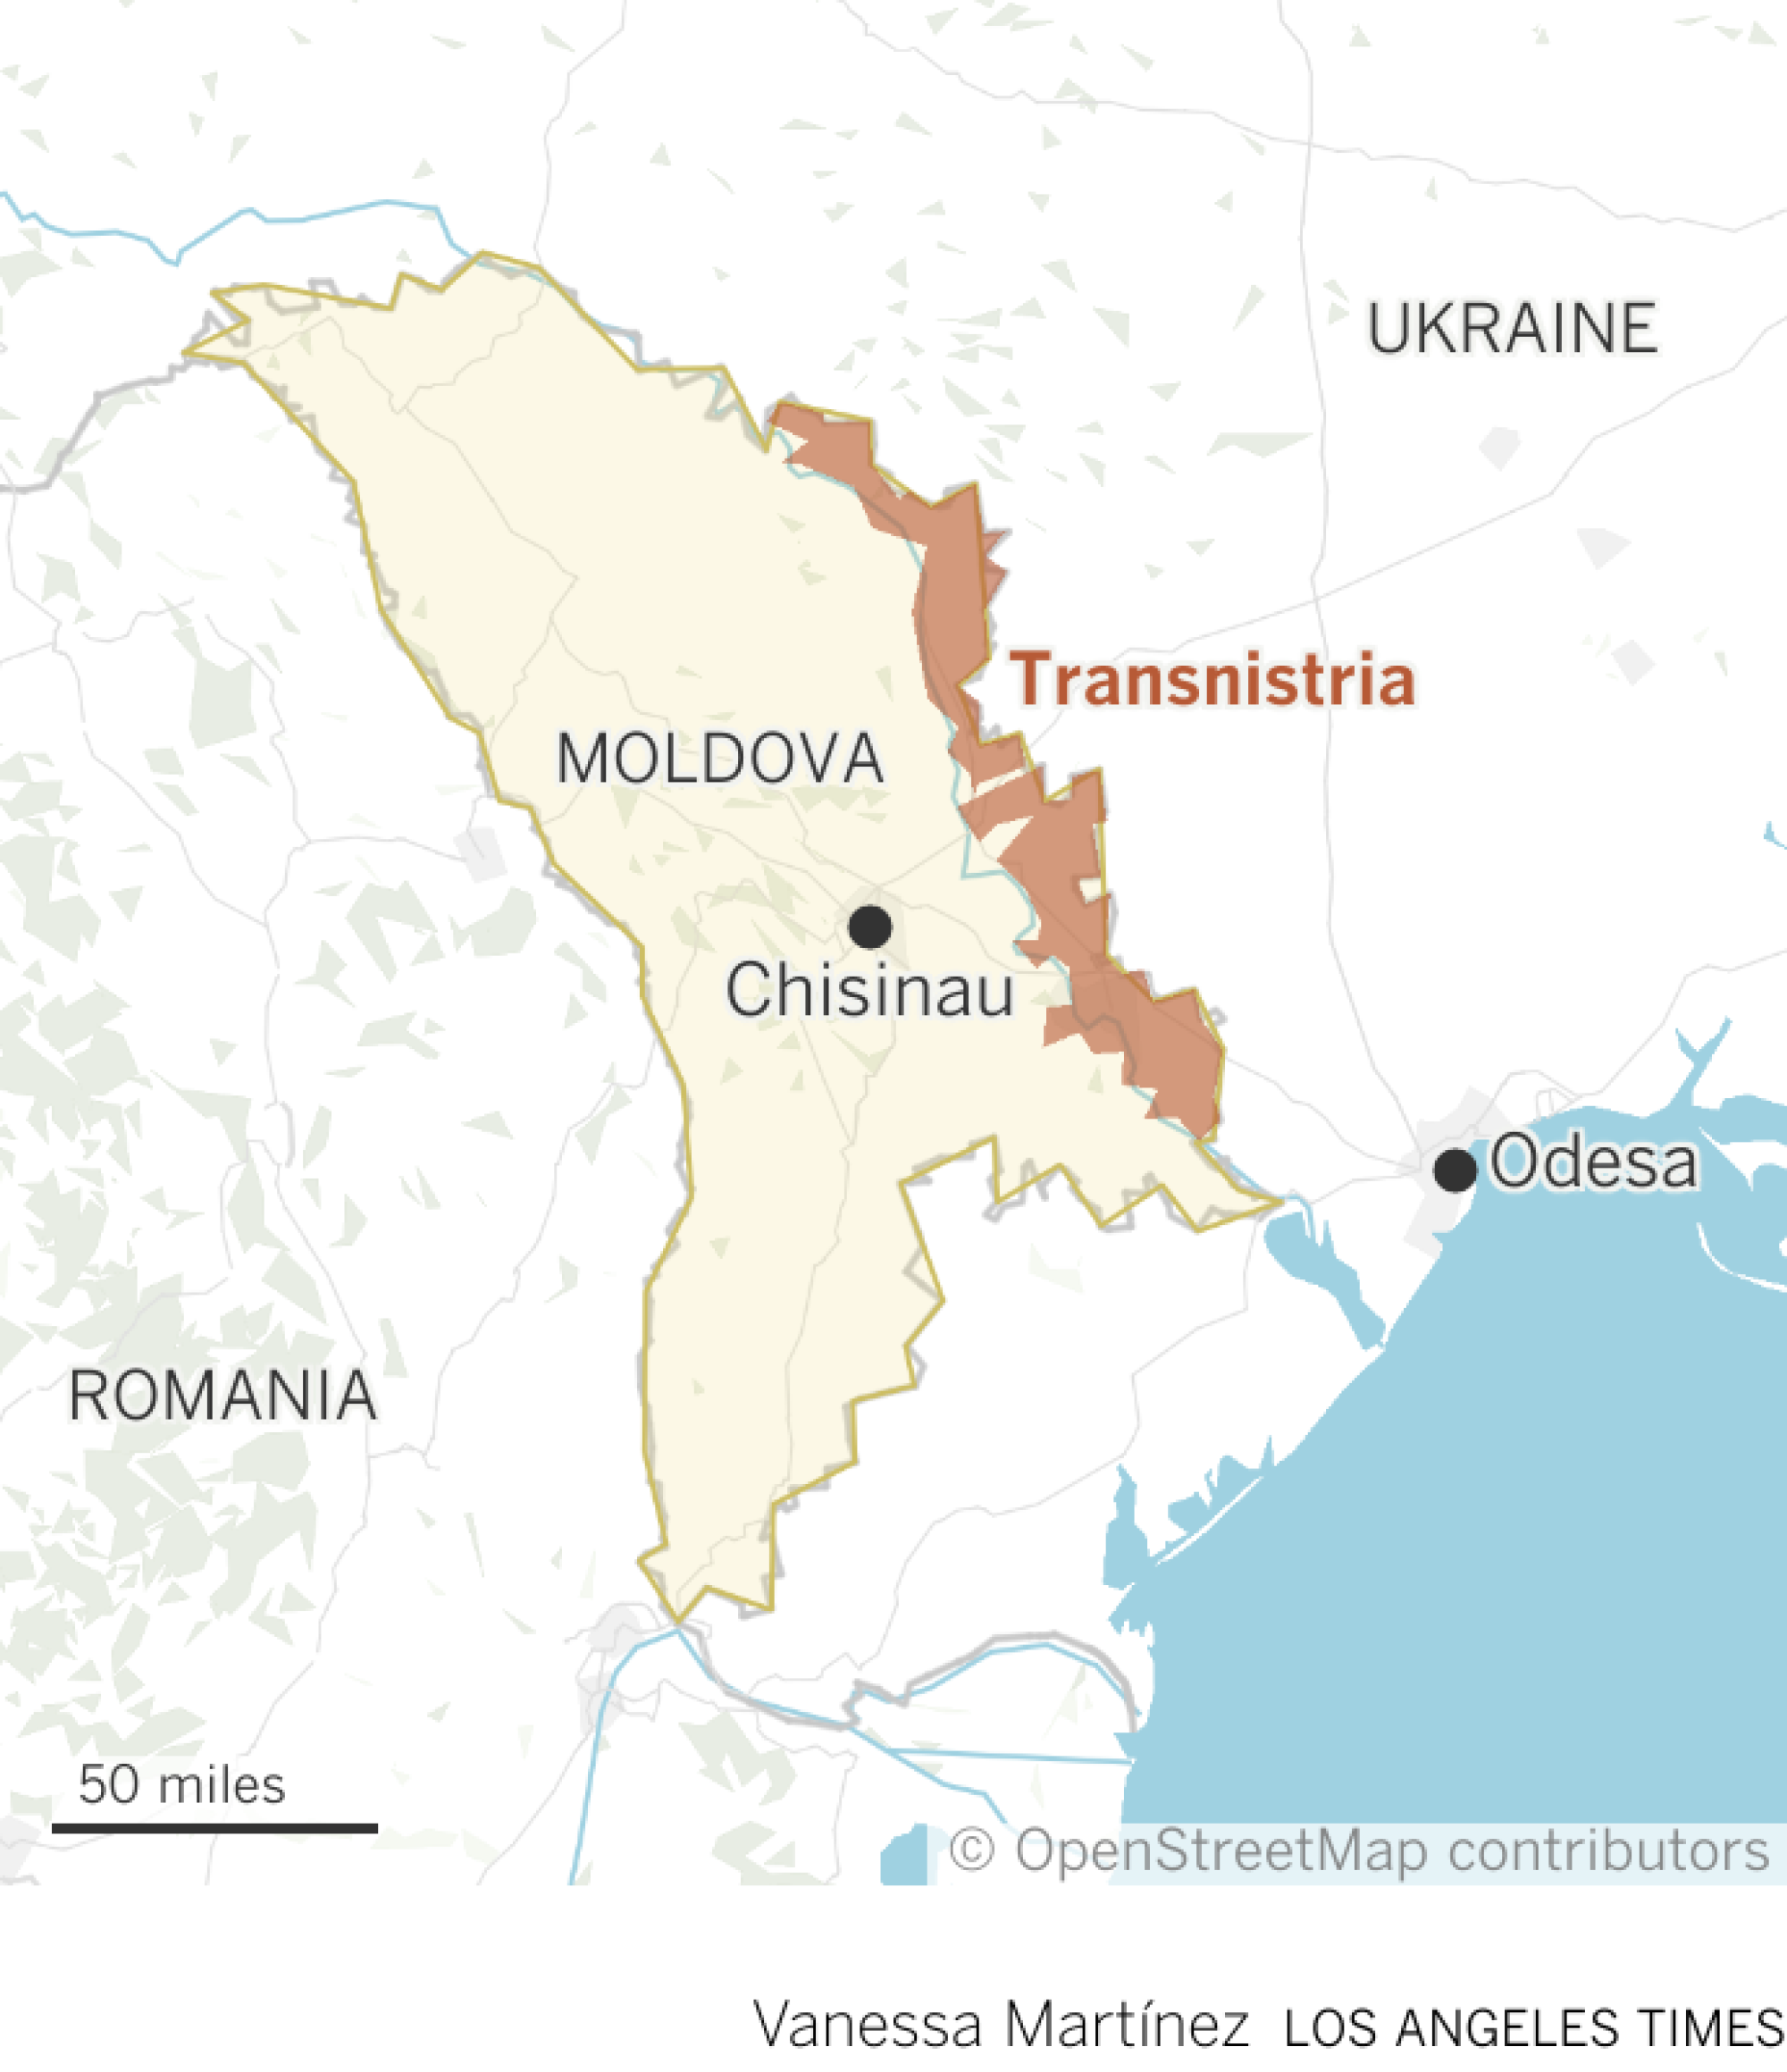 Map highlights Moldova and its capital, Chisinau. Also highlighted is Transnistria, which is located along Moldova's eastern border with Ukraine.